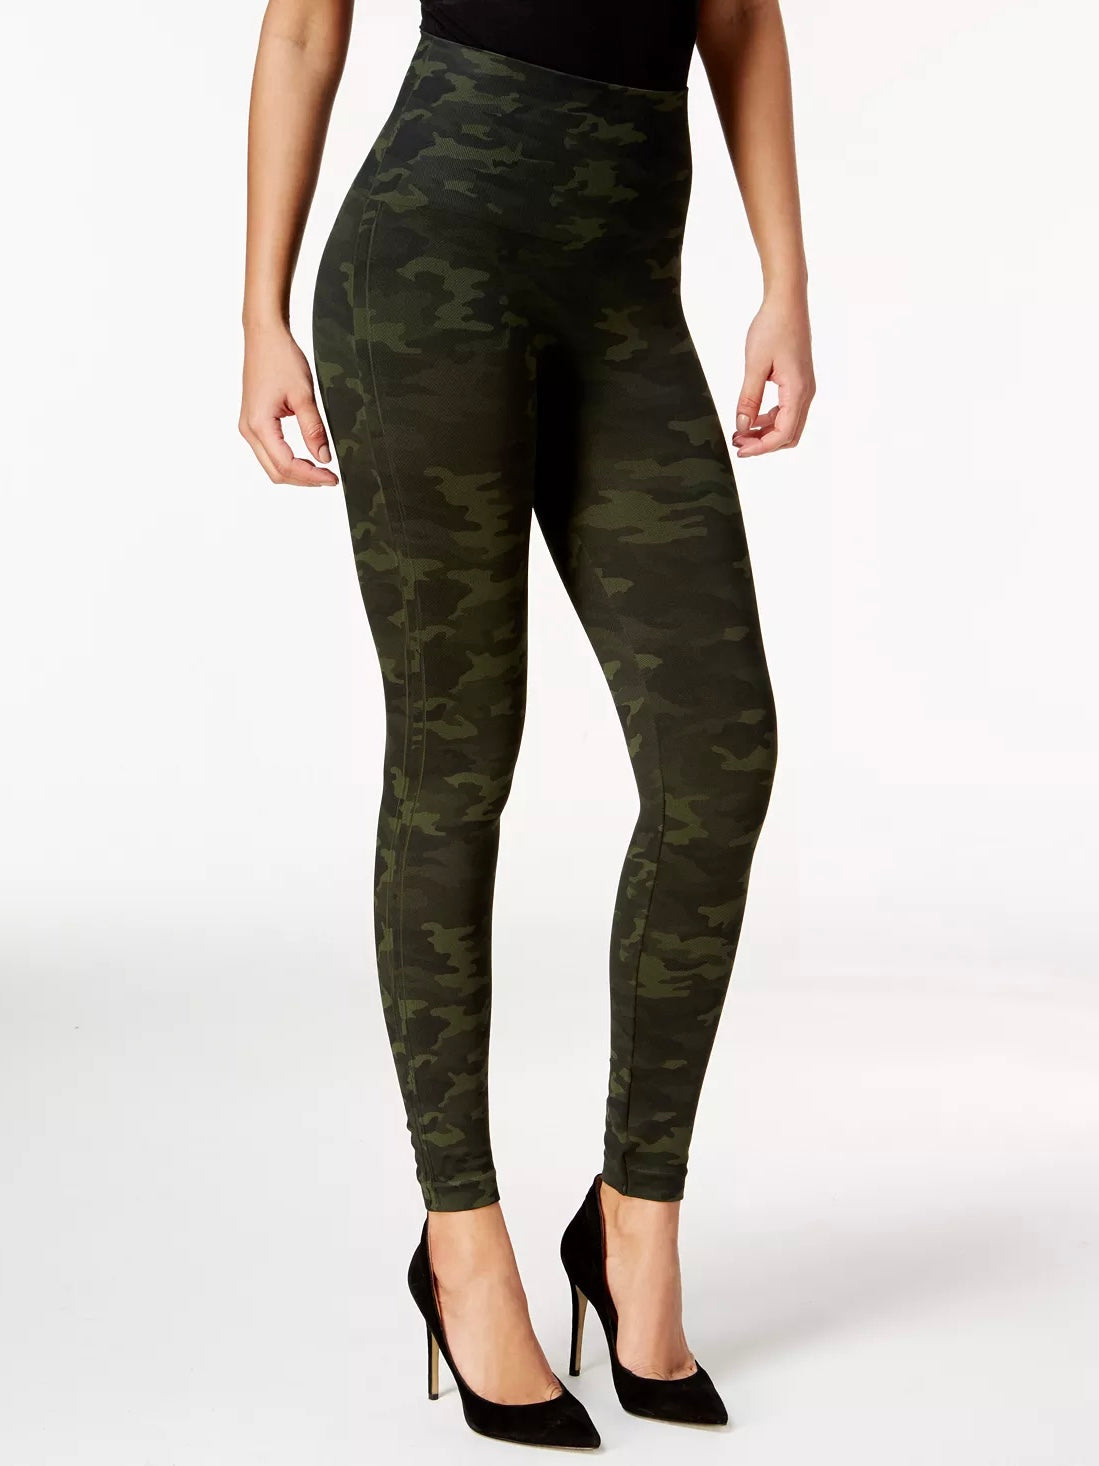 Spanx Seamless Look At Me Now Leggings- Green Camo – Davis Country